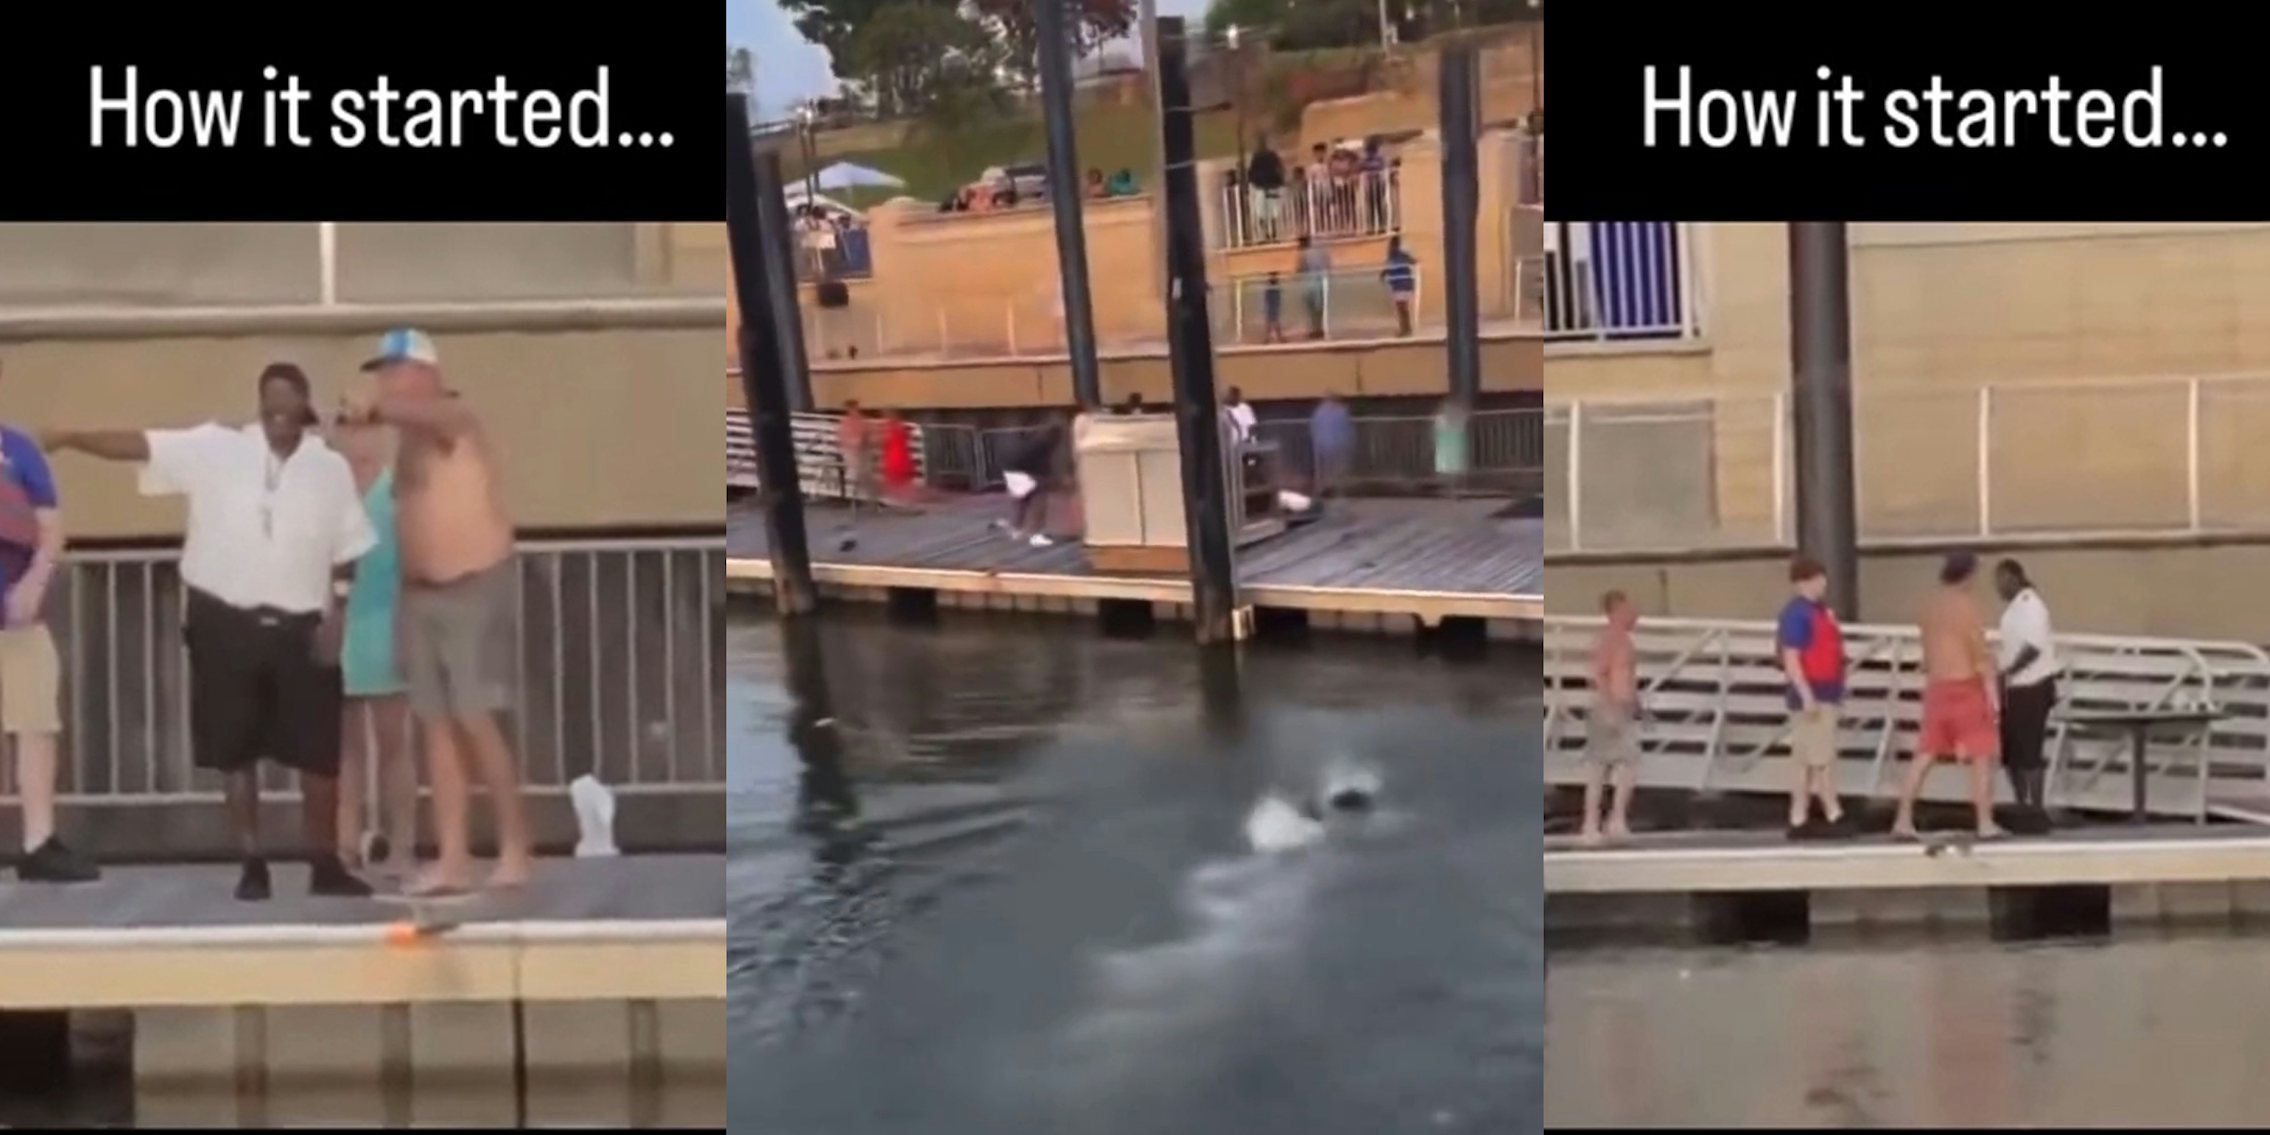 riverboat fight video on dock with caption 'how it started...' (l&r) people fighting on dock with man swimming (c)